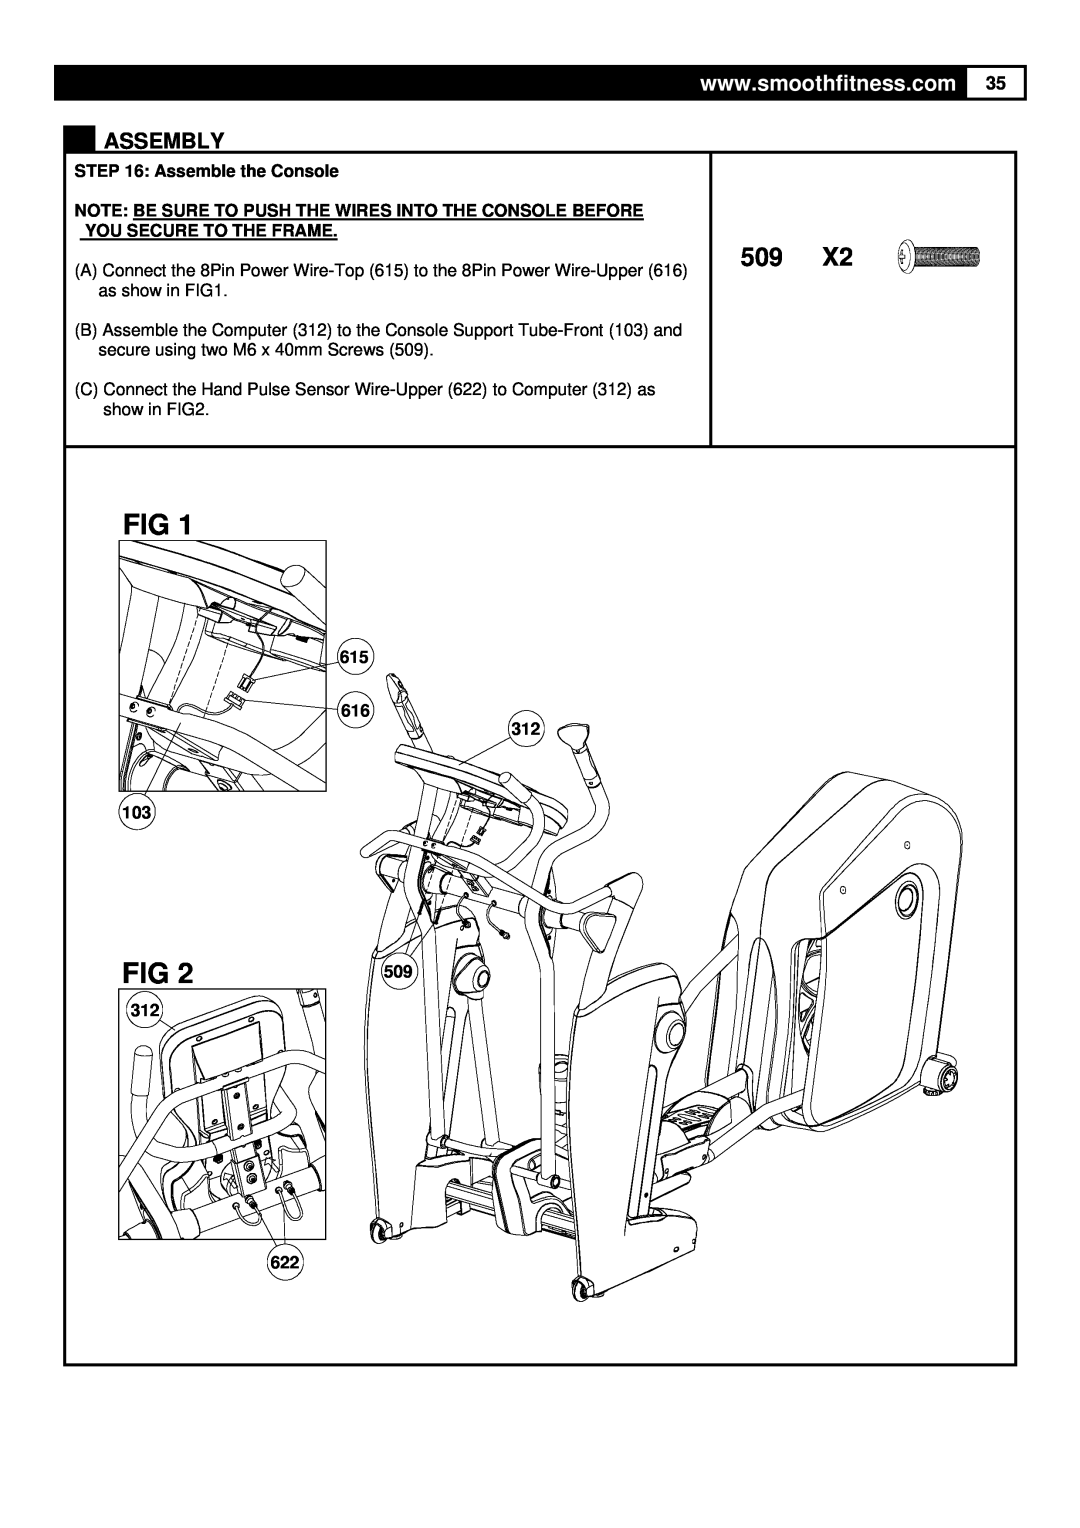 Smooth Fitness 9.25X user manual Assembly, Assemble the Console, 615 616 312 103 